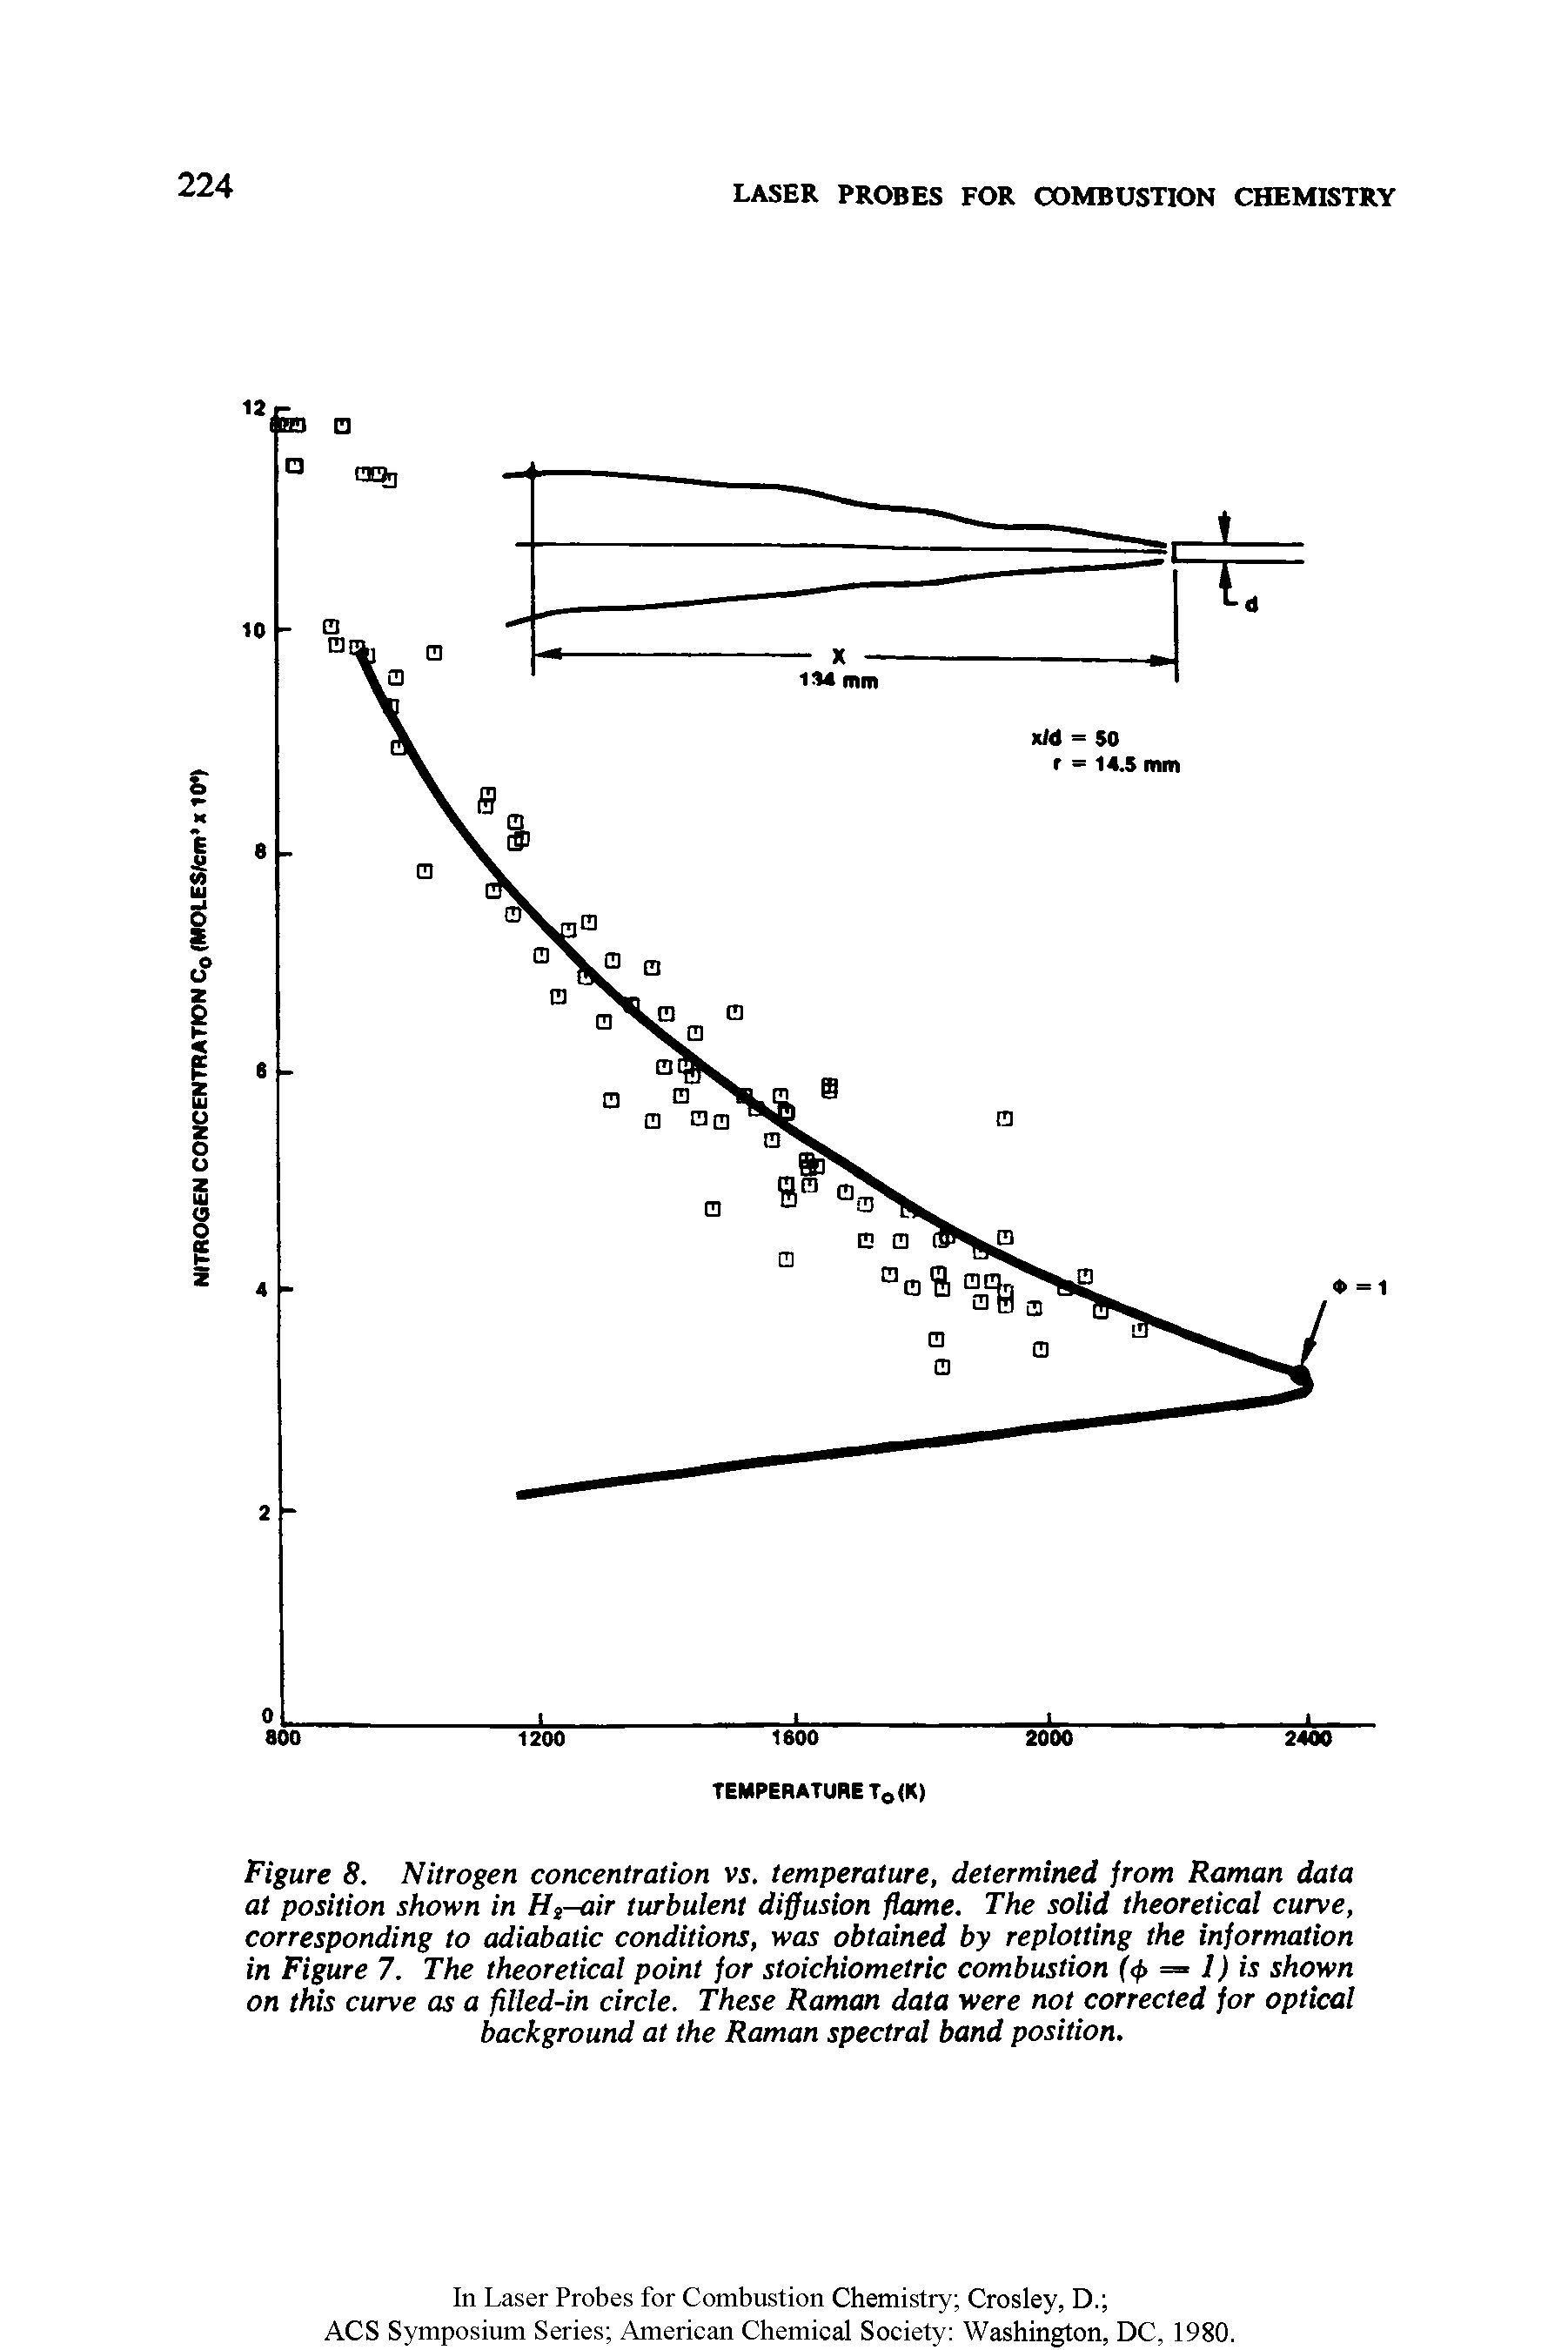 Figure 8. Nitrogen concentration vs. temperature, determined from Raman data at position shown in Hi-air turbulent diffusion flame. The solid theoretical curve, corresponding to adiabatic conditions, was obtained by replotting the information in Figure 7. The theoretical point for stoichiometric combustion (<j> = 1) is shown on this curve as a filled-in circle. These Raman data were not corrected for optical background at the Raman spectral band position.